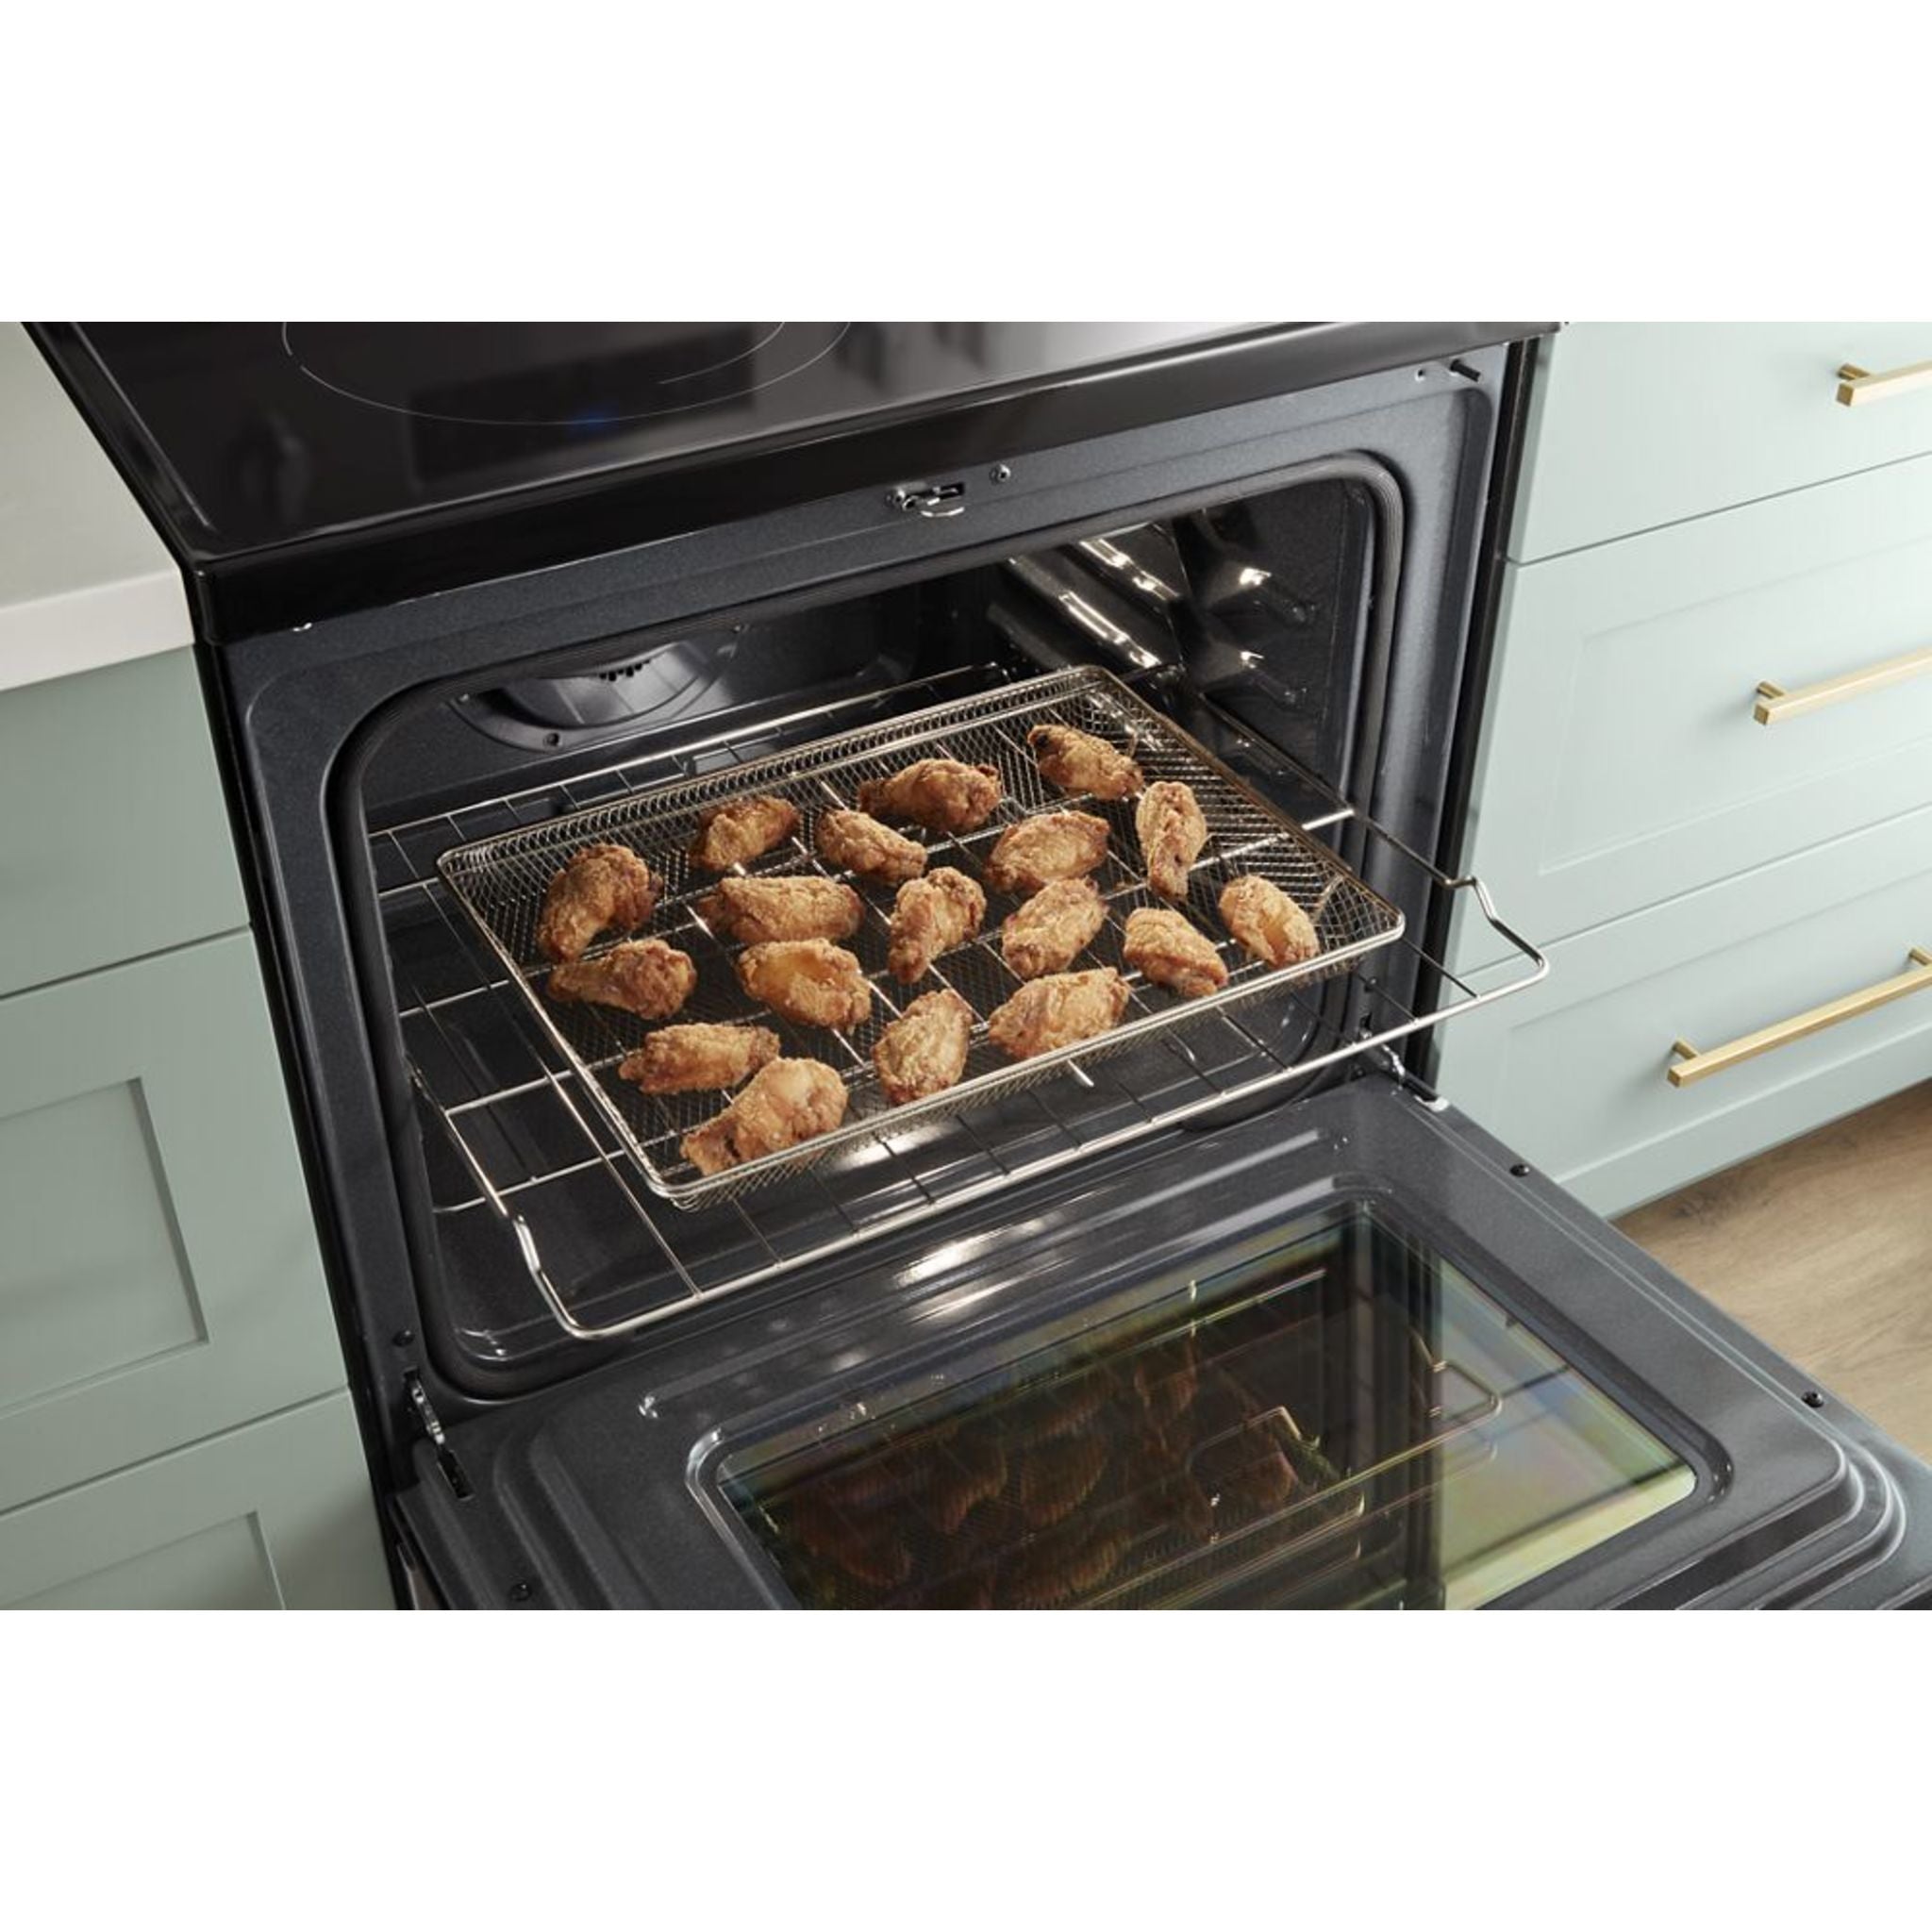 Whirlpool, 27" Single True Convection Wall Oven (WOES7027PZ) - Fingerprint Resistant Stainless Steel